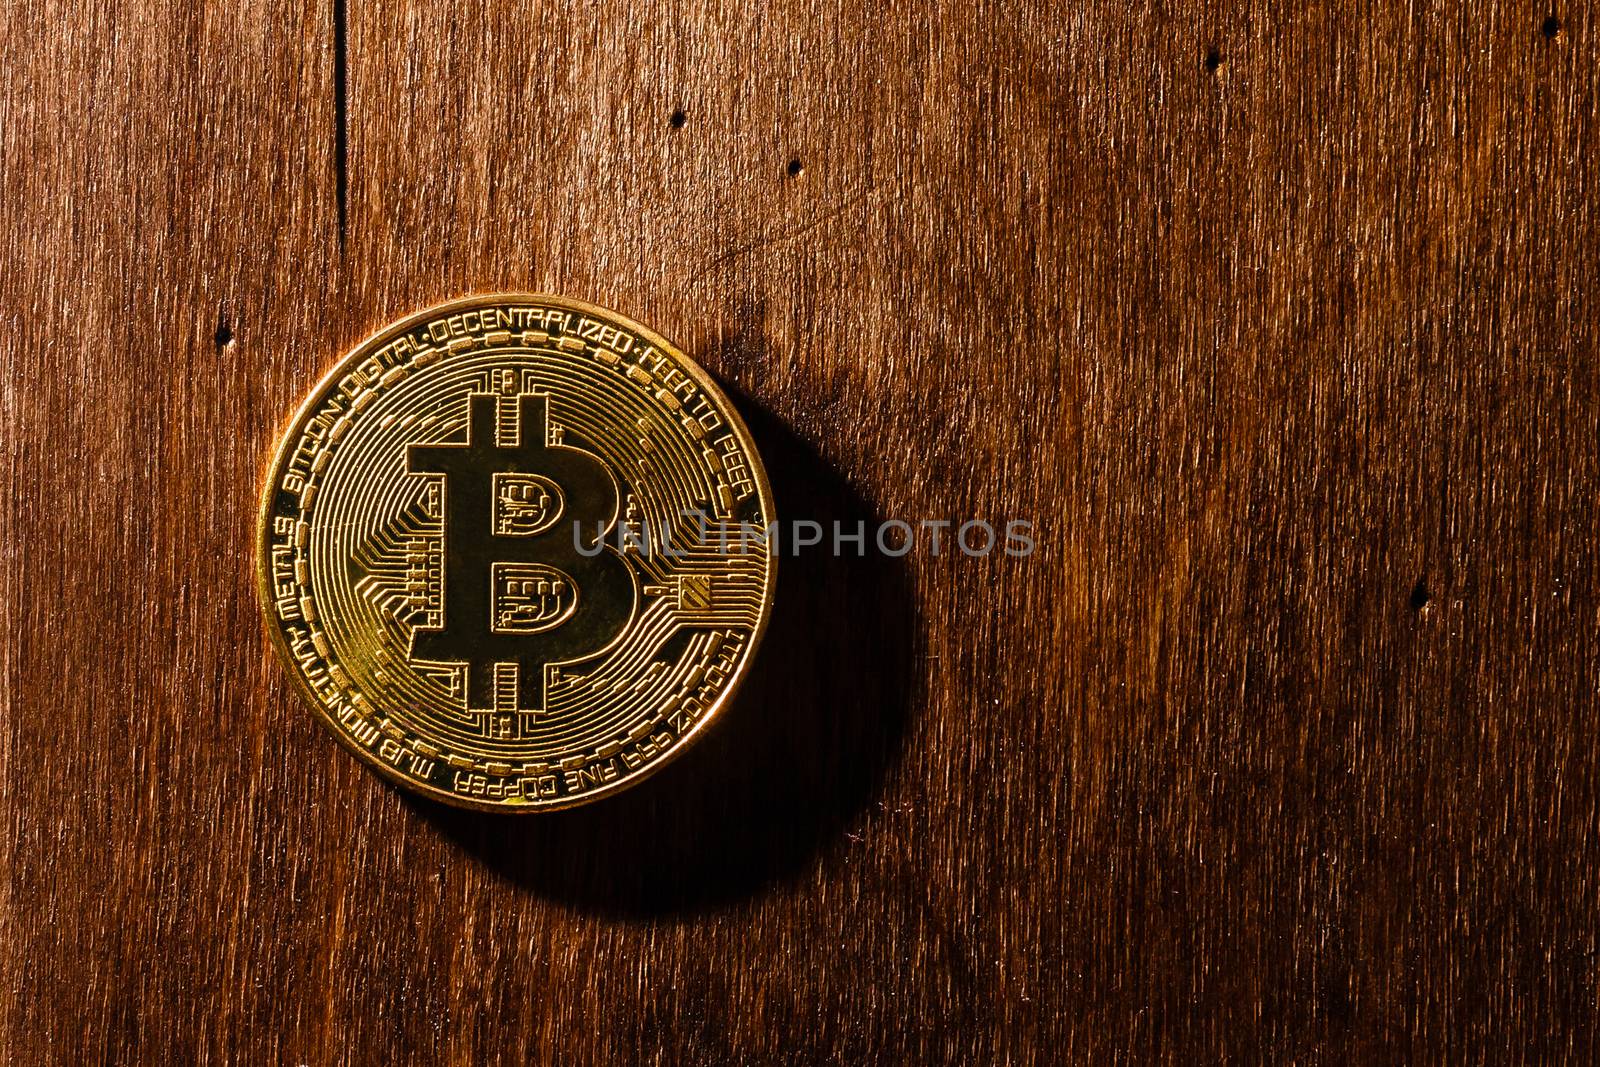 The golden bitcoin on wooden table and bokeh background, golden bitcoin symbol of bitcoin crytocurrency from blockchain technology.